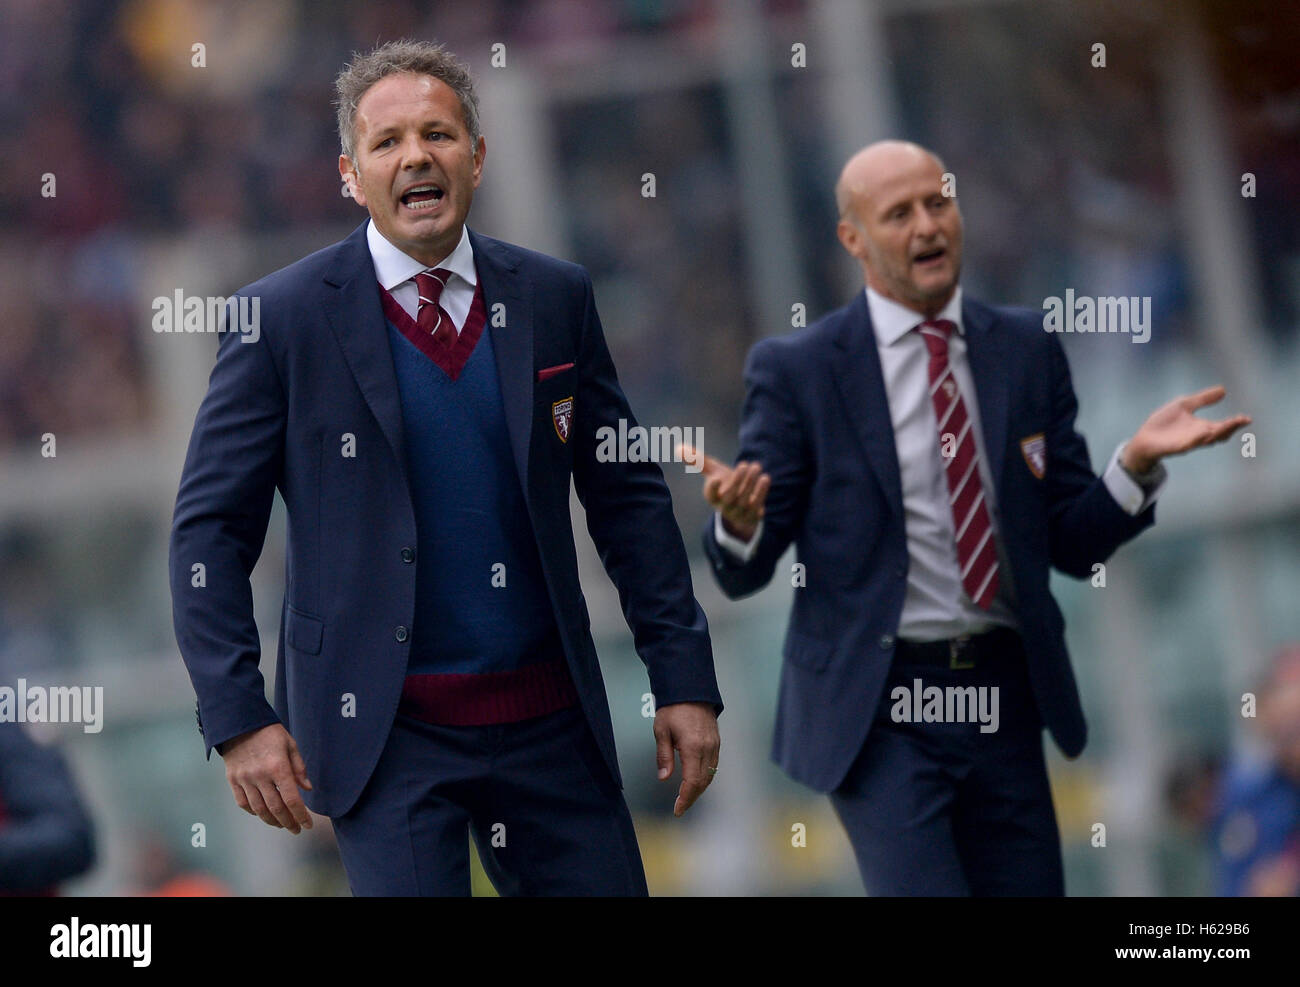 Turin, Italy. 23rd Oct, 2016. Sinisa Mihajlovic (left), head coach of Torino FC, and his assist coach Attilio Lombardo look on during the Serie A football match between Torino FC and SS Lazio. The final result was 2-2 © Nicolo Campo/Pacific Press/Alamy Live News Stock Photo